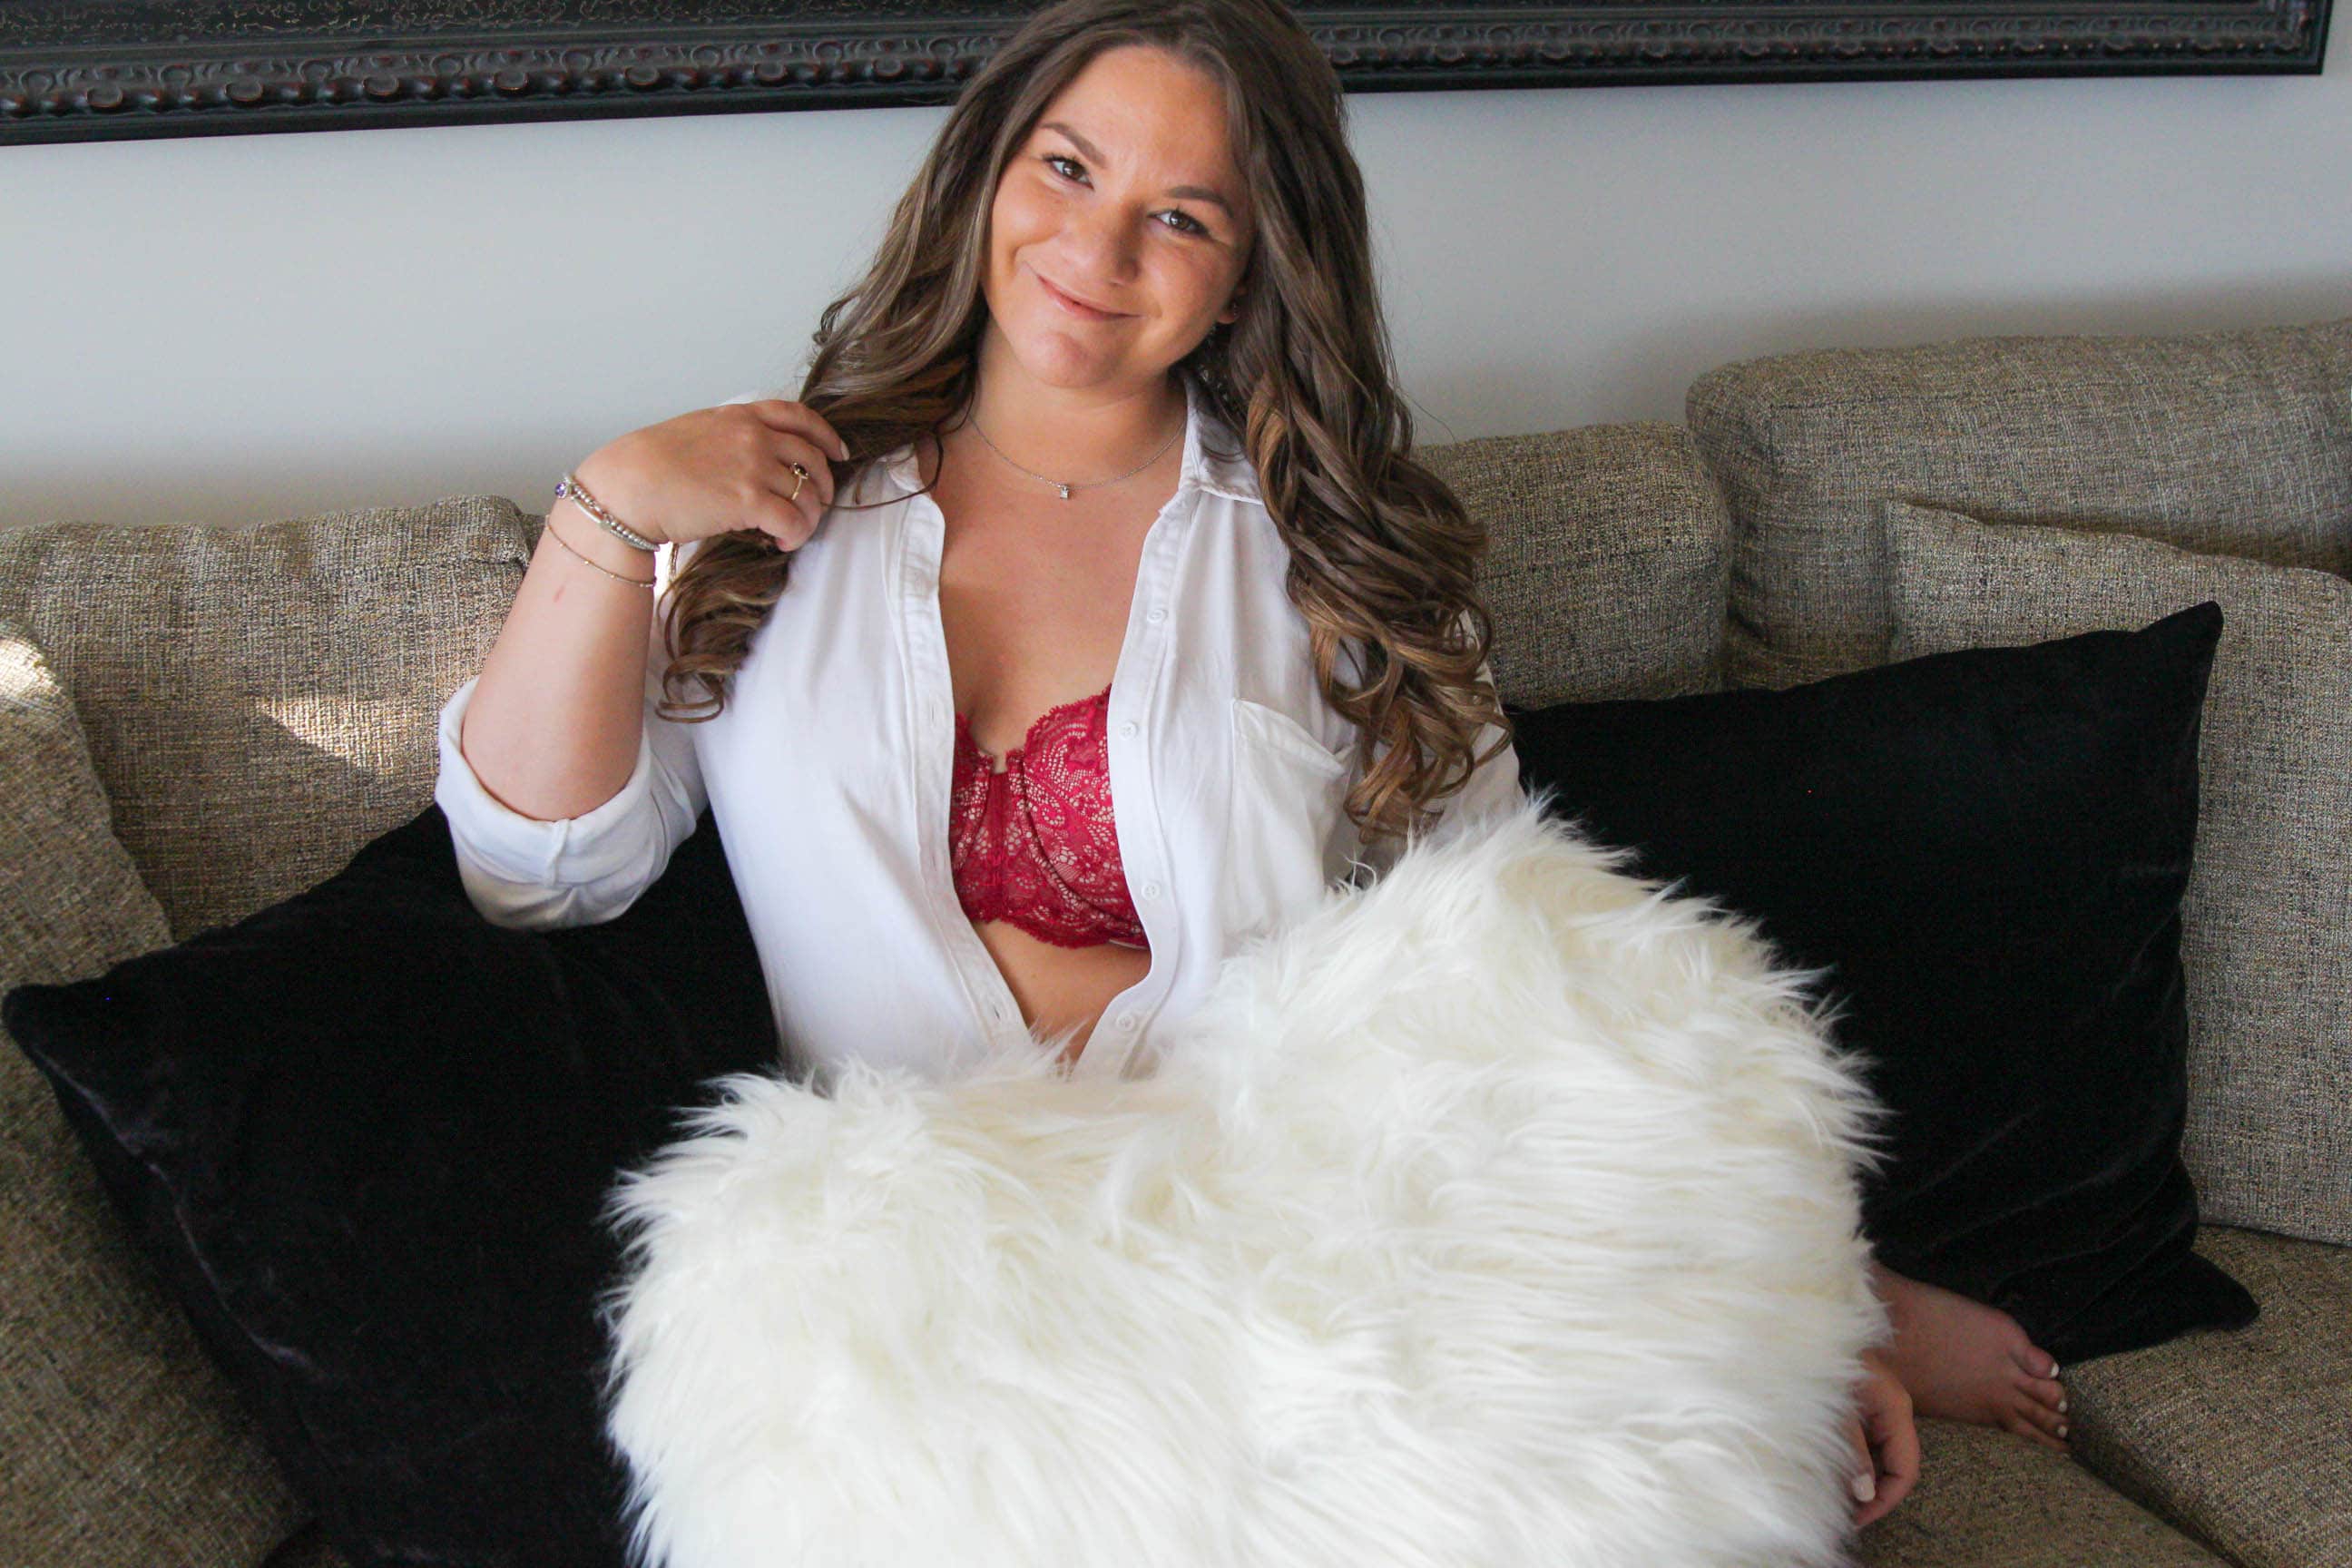 missyonmadison, missy on madison instagram, melissa tierney, la blogger, fashion blogger, bra review, perfect fit bra, perfect fit, bloglovin, third love, third love bras, third love lingerie, lace bras, bralette, bra services, full coverage bras, red lace bra, date night lingerie, date night bras, fashion blogger, style blogger,